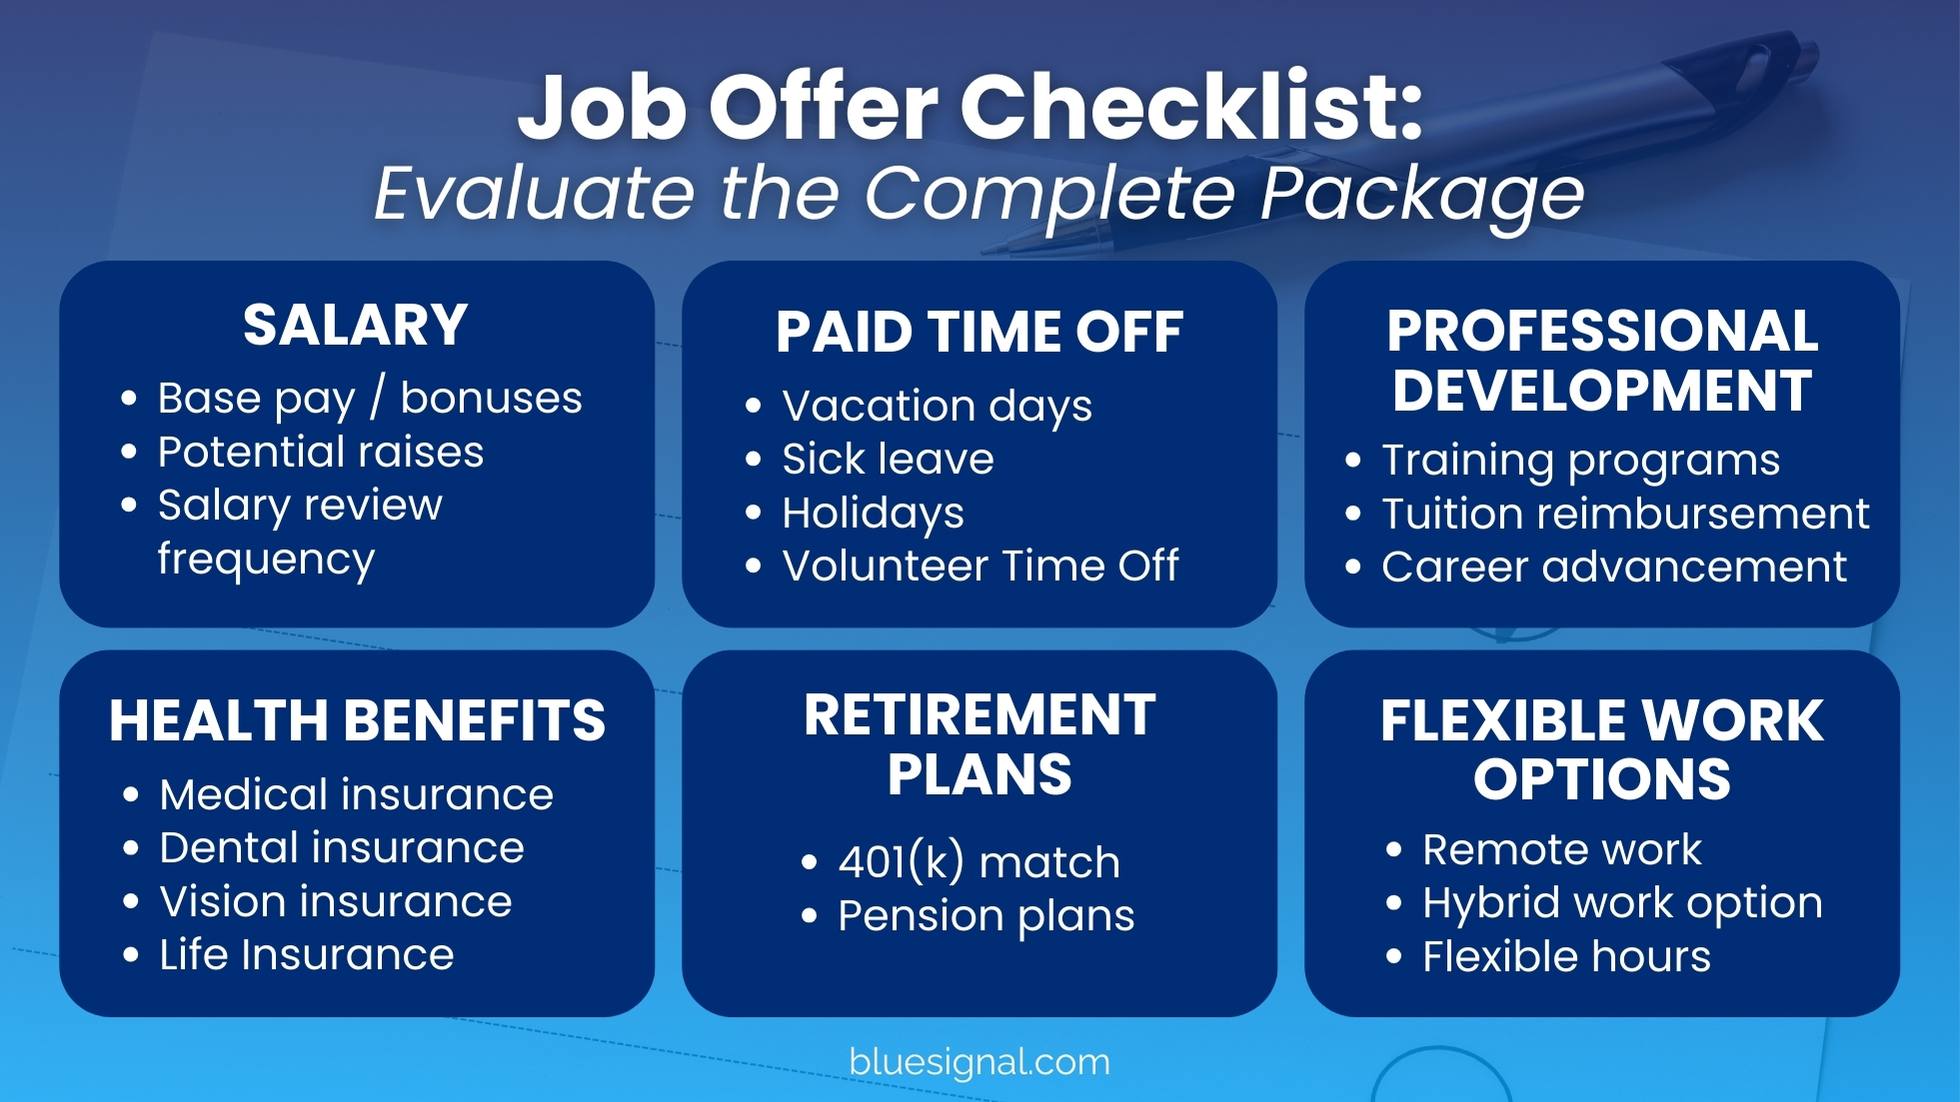 A detailed job offer checklist showing categories such as Salary, Health Benefits, Paid Time Off, Retirement Plans, Professional Development, and Flexible Work Options.